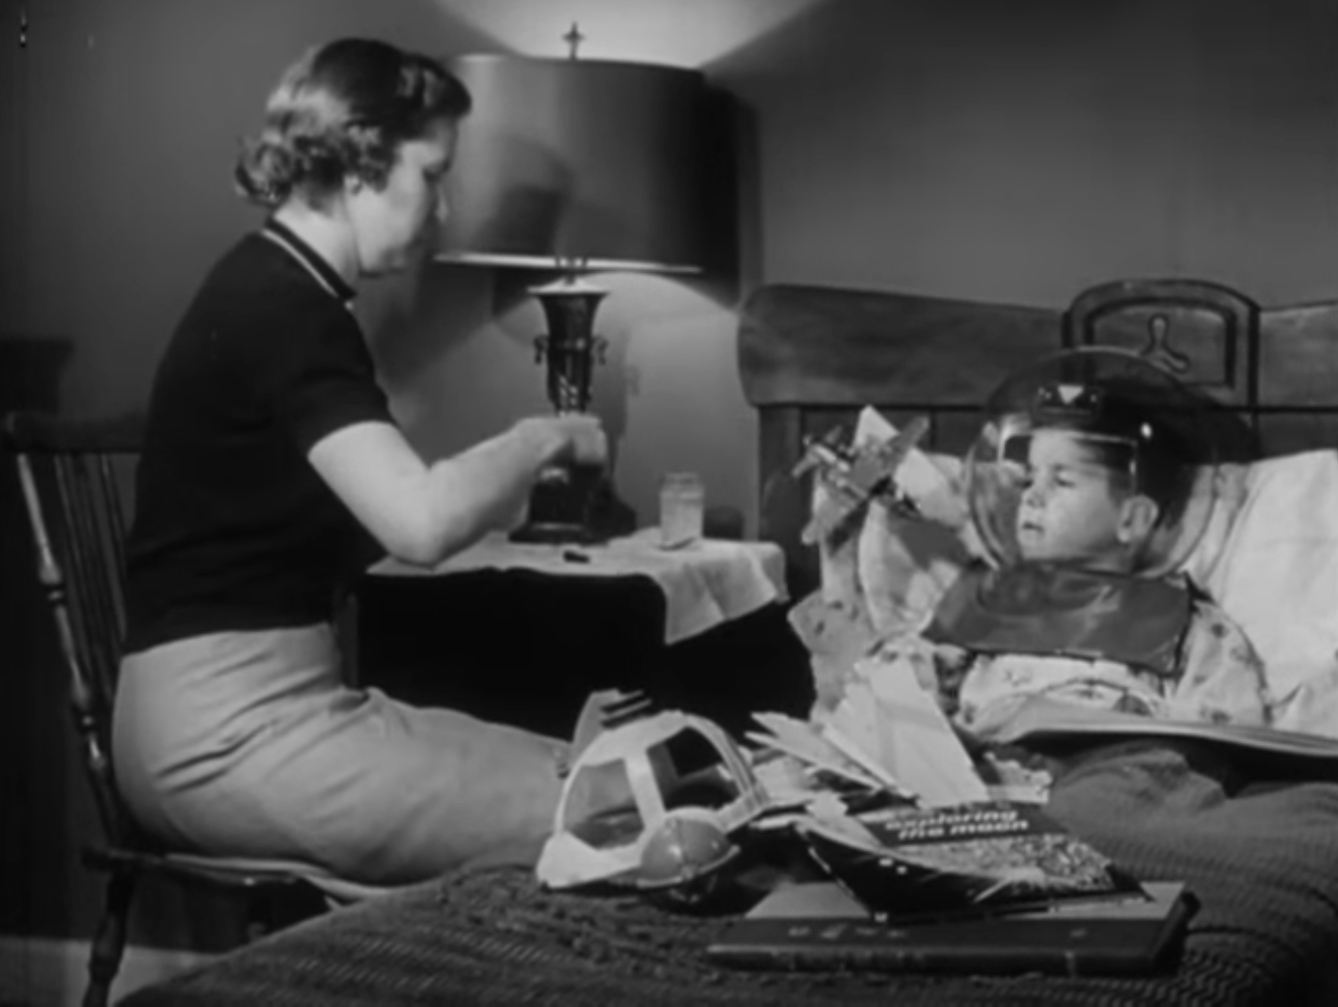 Still from black and white film featuring a boy in bed wearing an astronaut helmet costume, and a woman sat on a chair next to his bed.